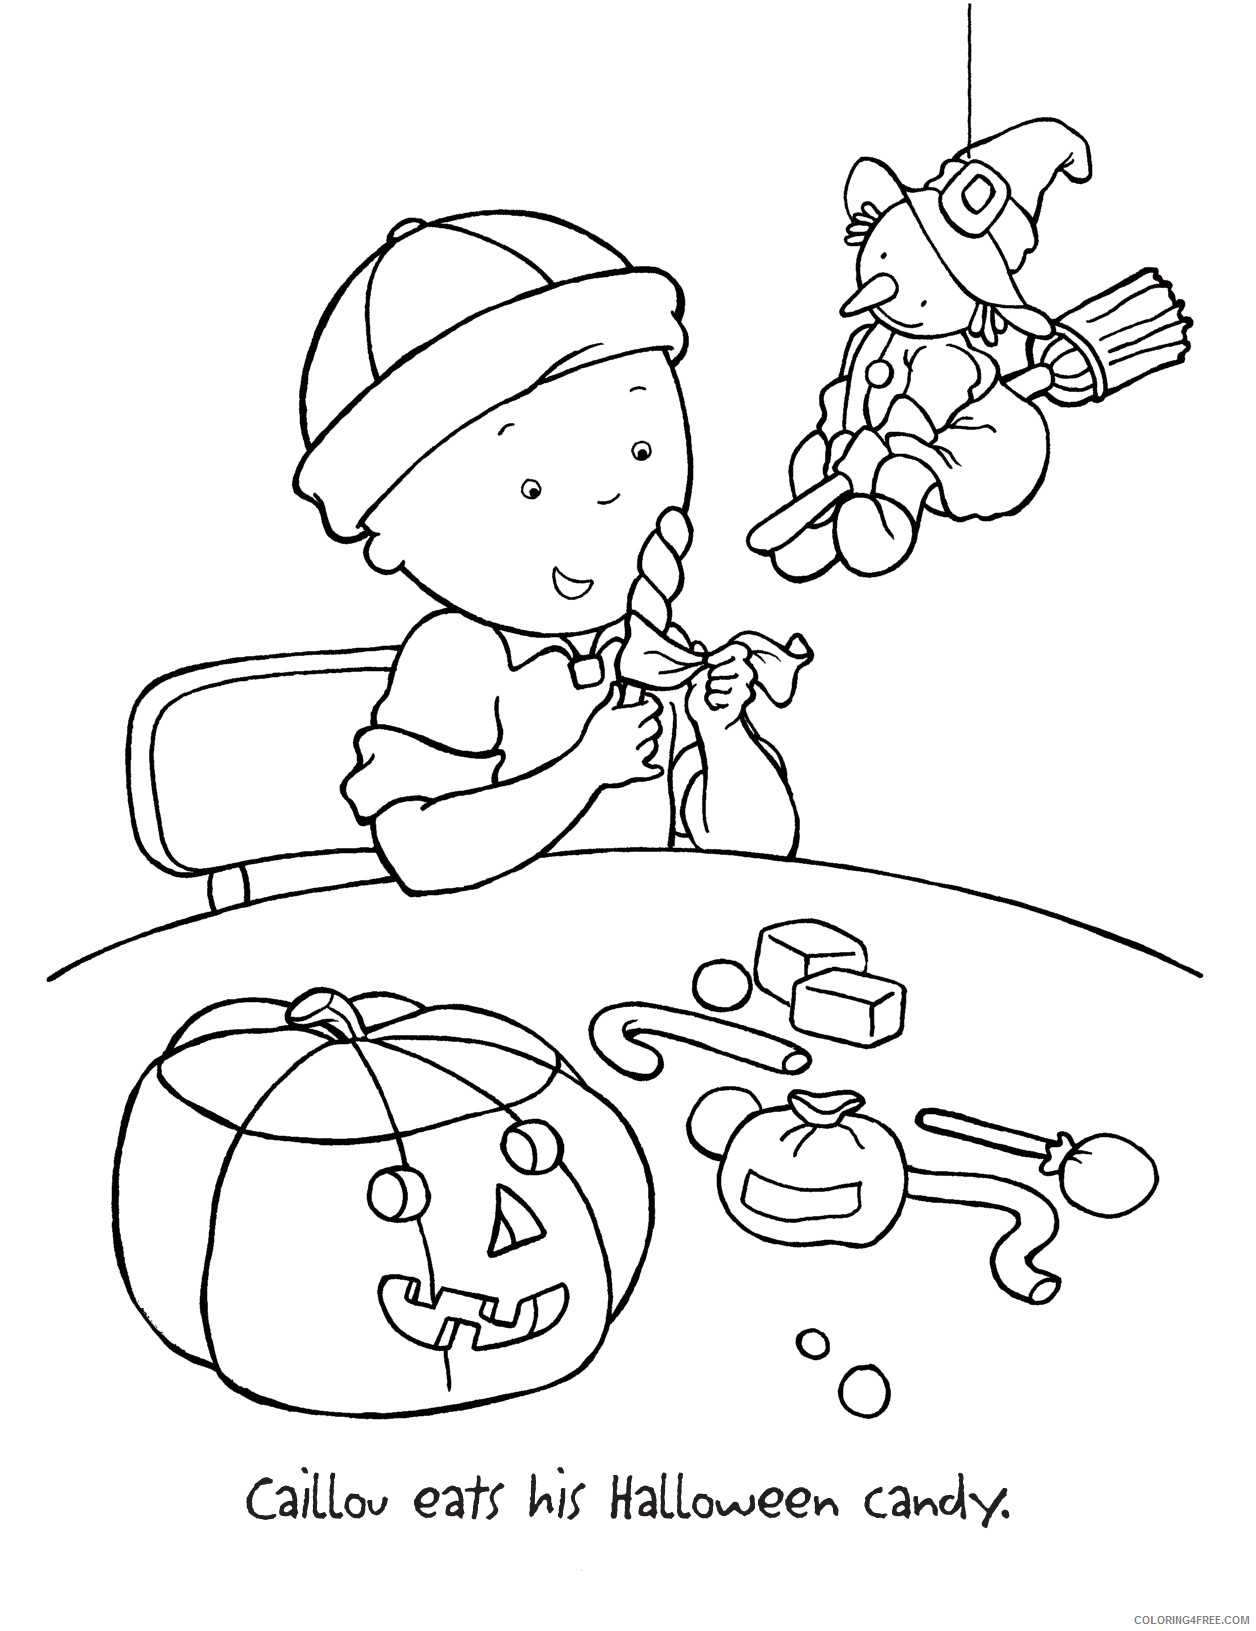 Caillou Coloring Pages Cartoons Caillou Kids For Printable 2020 1486 Coloring4free